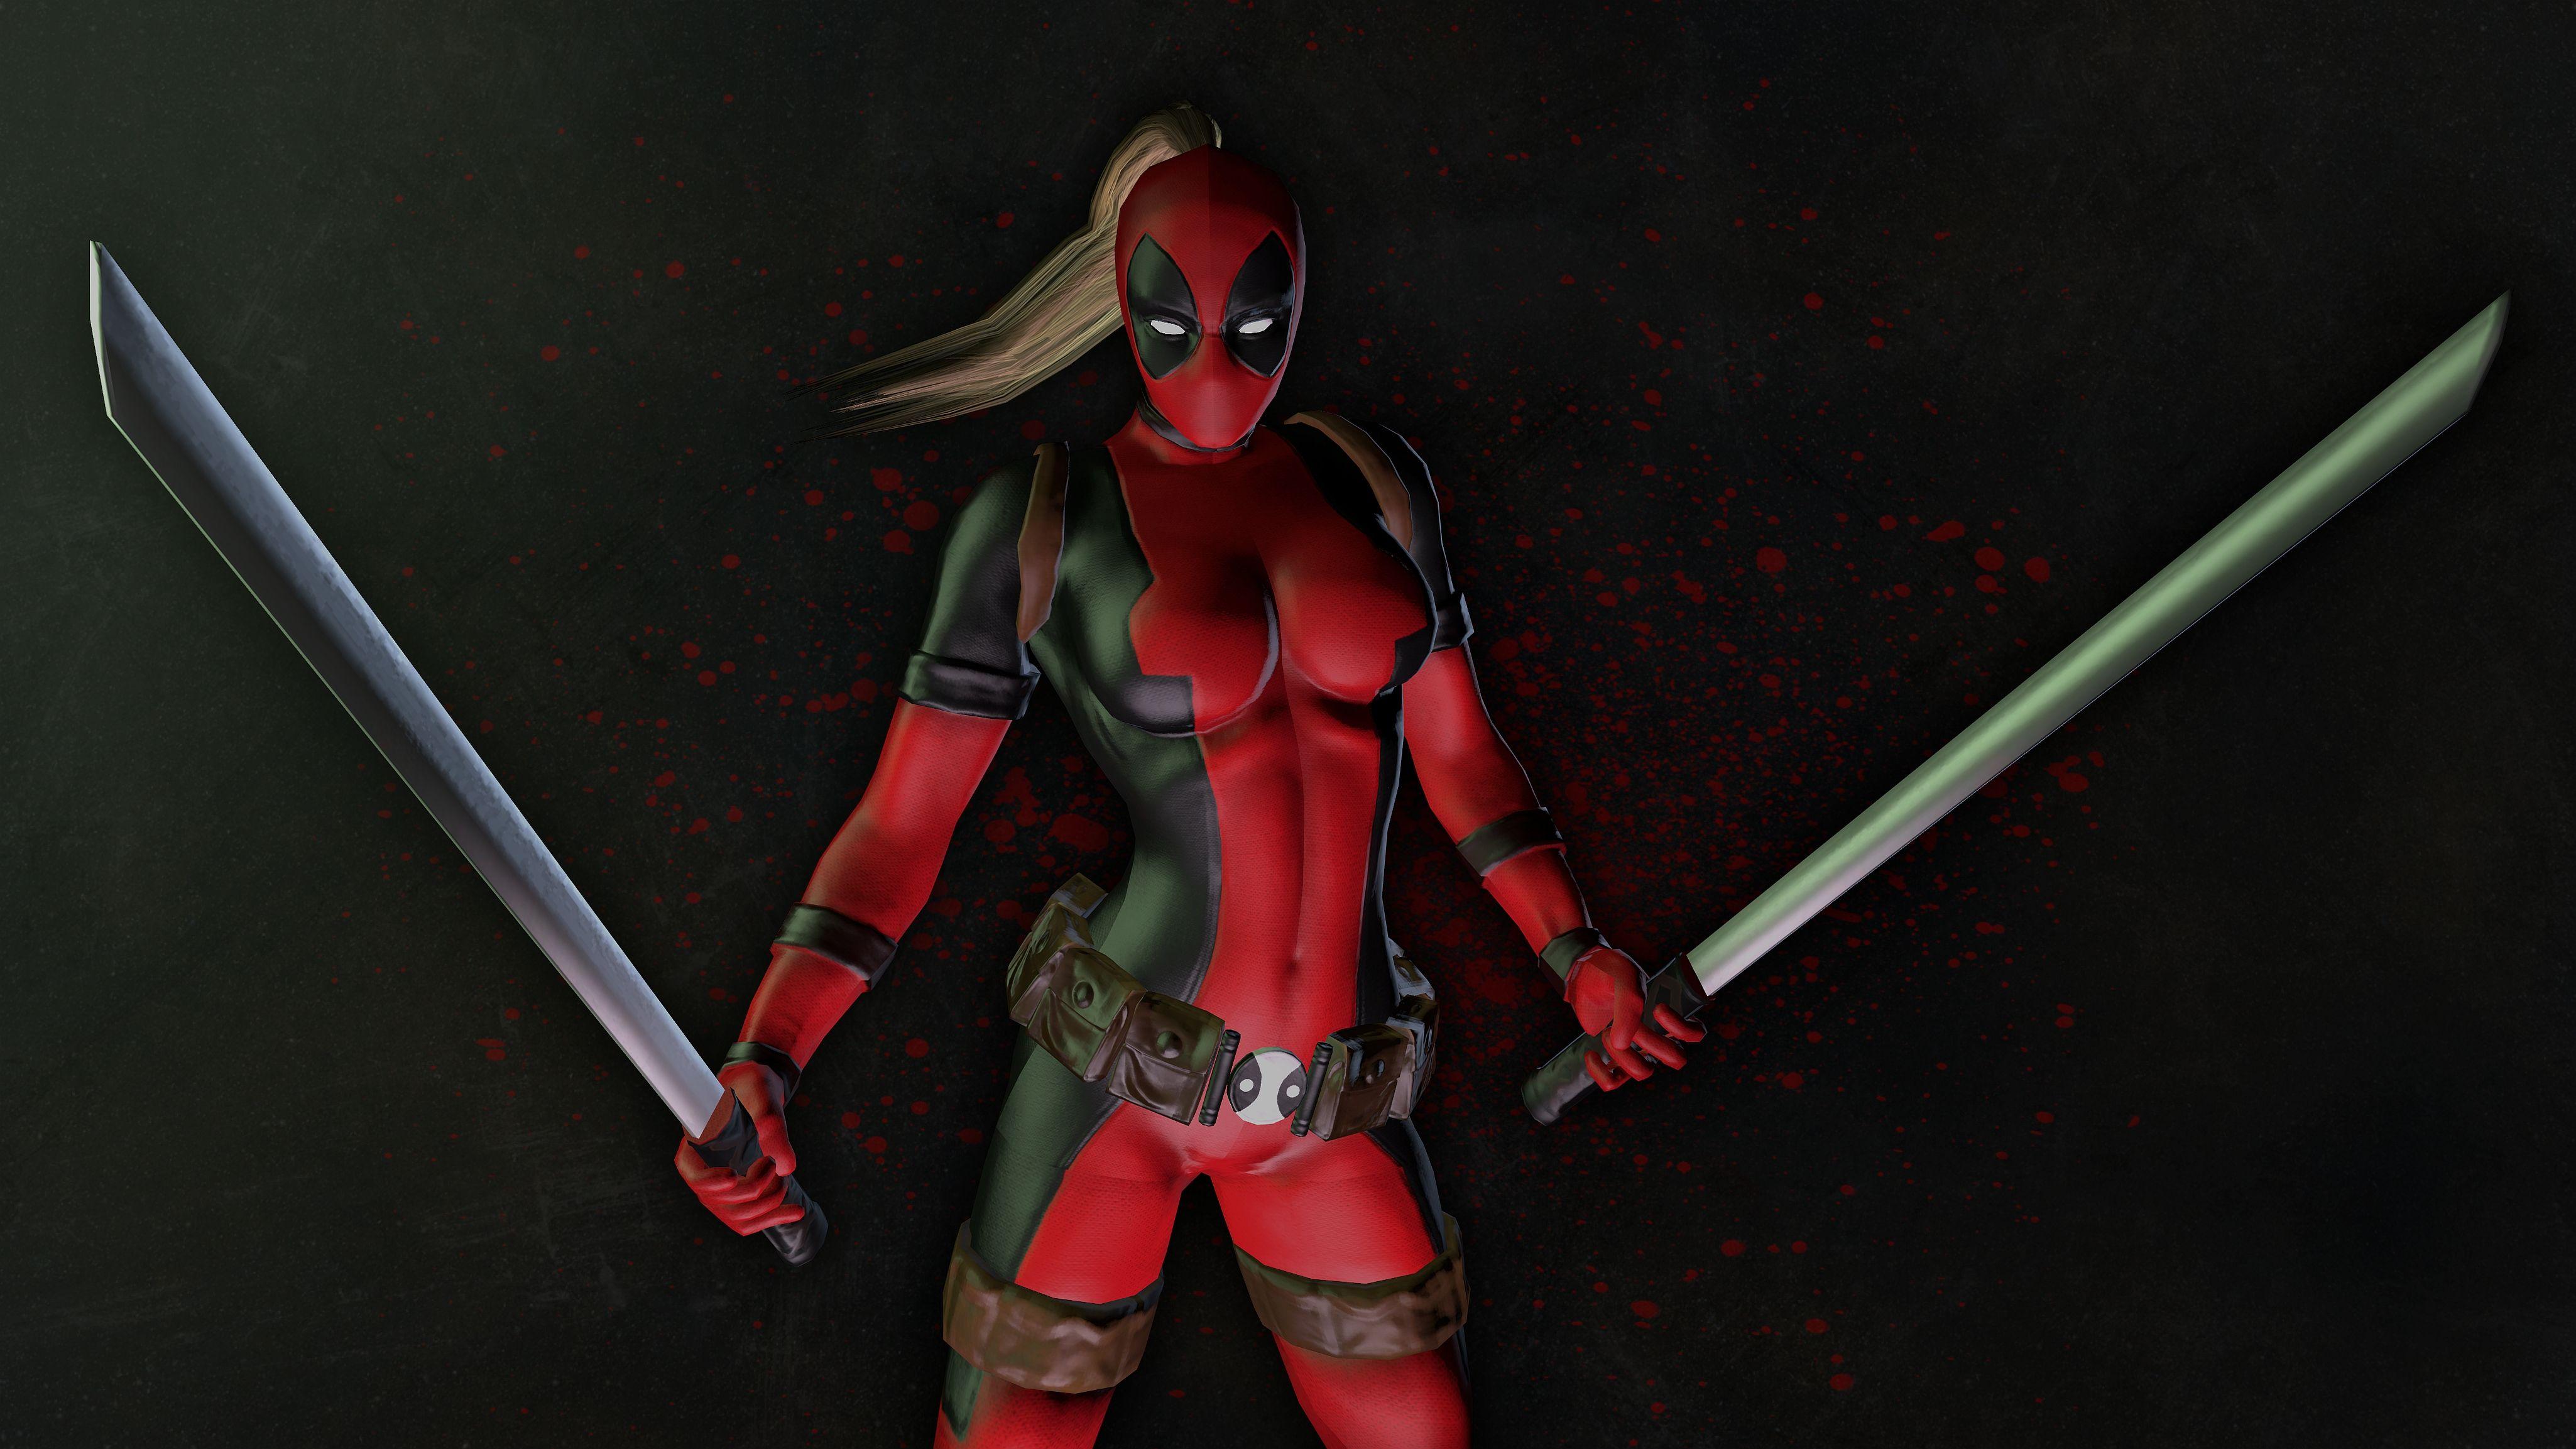 Lady Deadpool 4k Ultra HD Wallpaper and Background Imagex2306